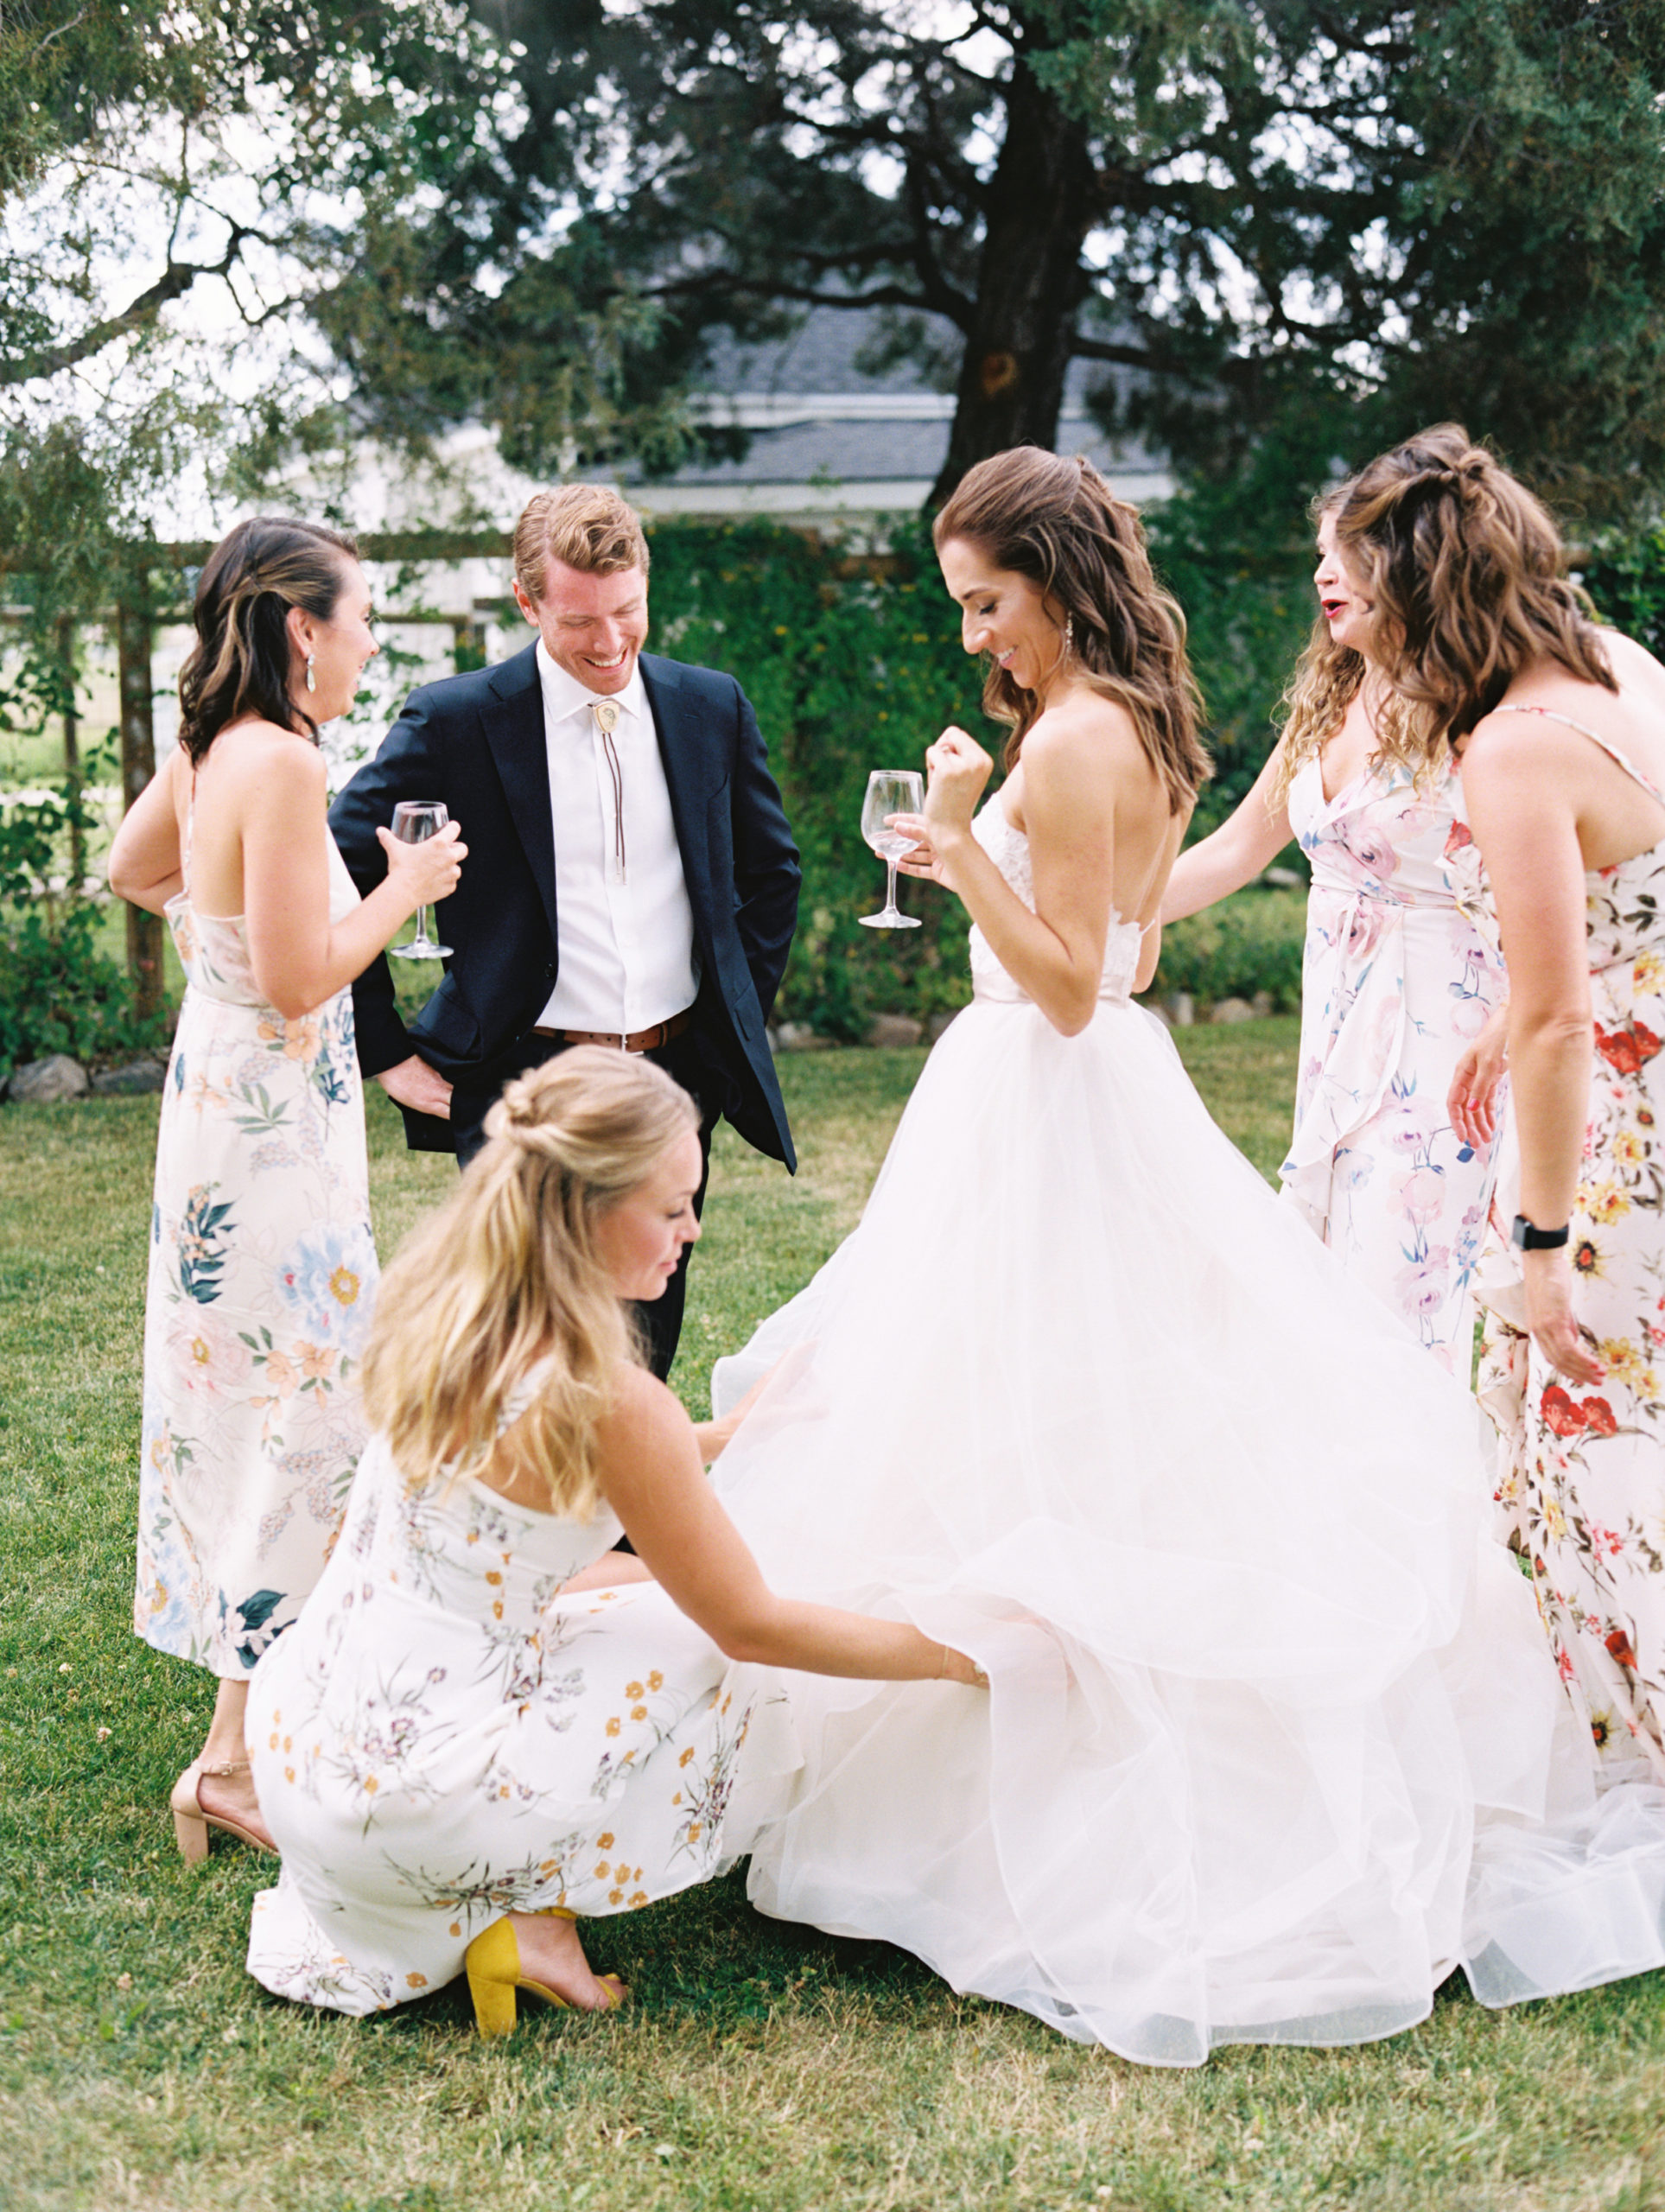 candid wedding photo of bridesmaids helping bride with her wedding dress